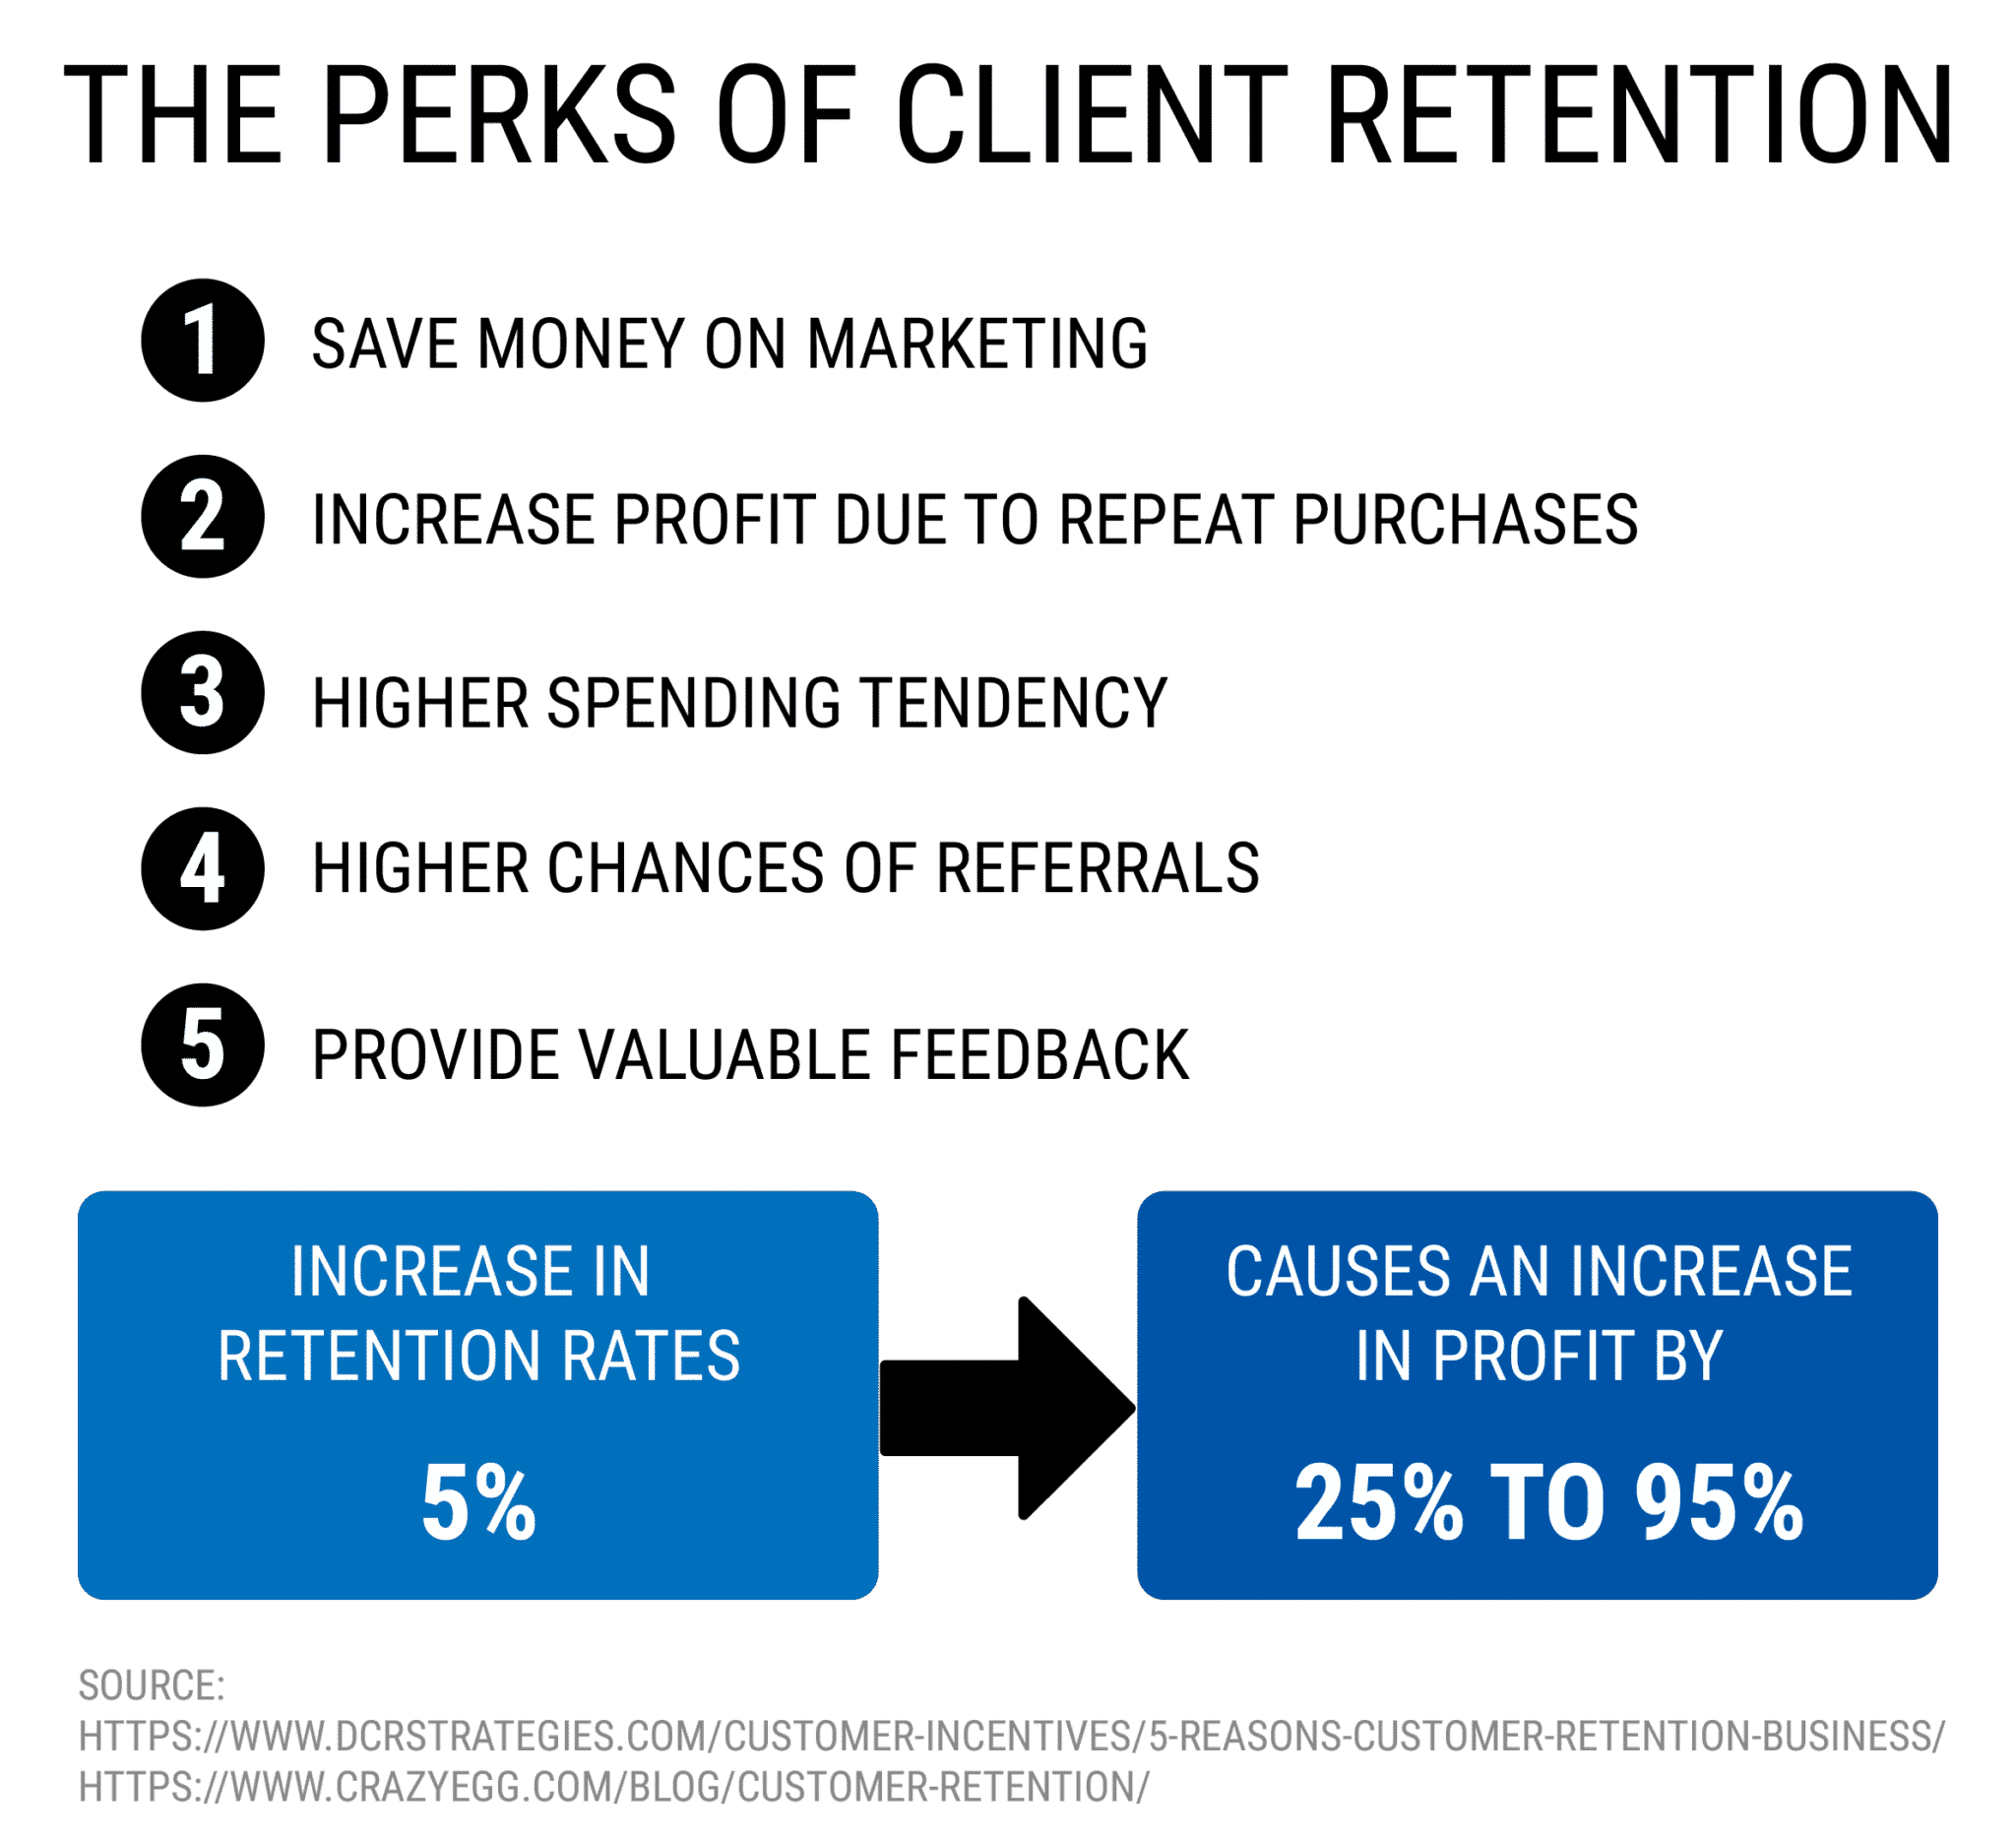 THE PERKS OF CLIENT RETENTION